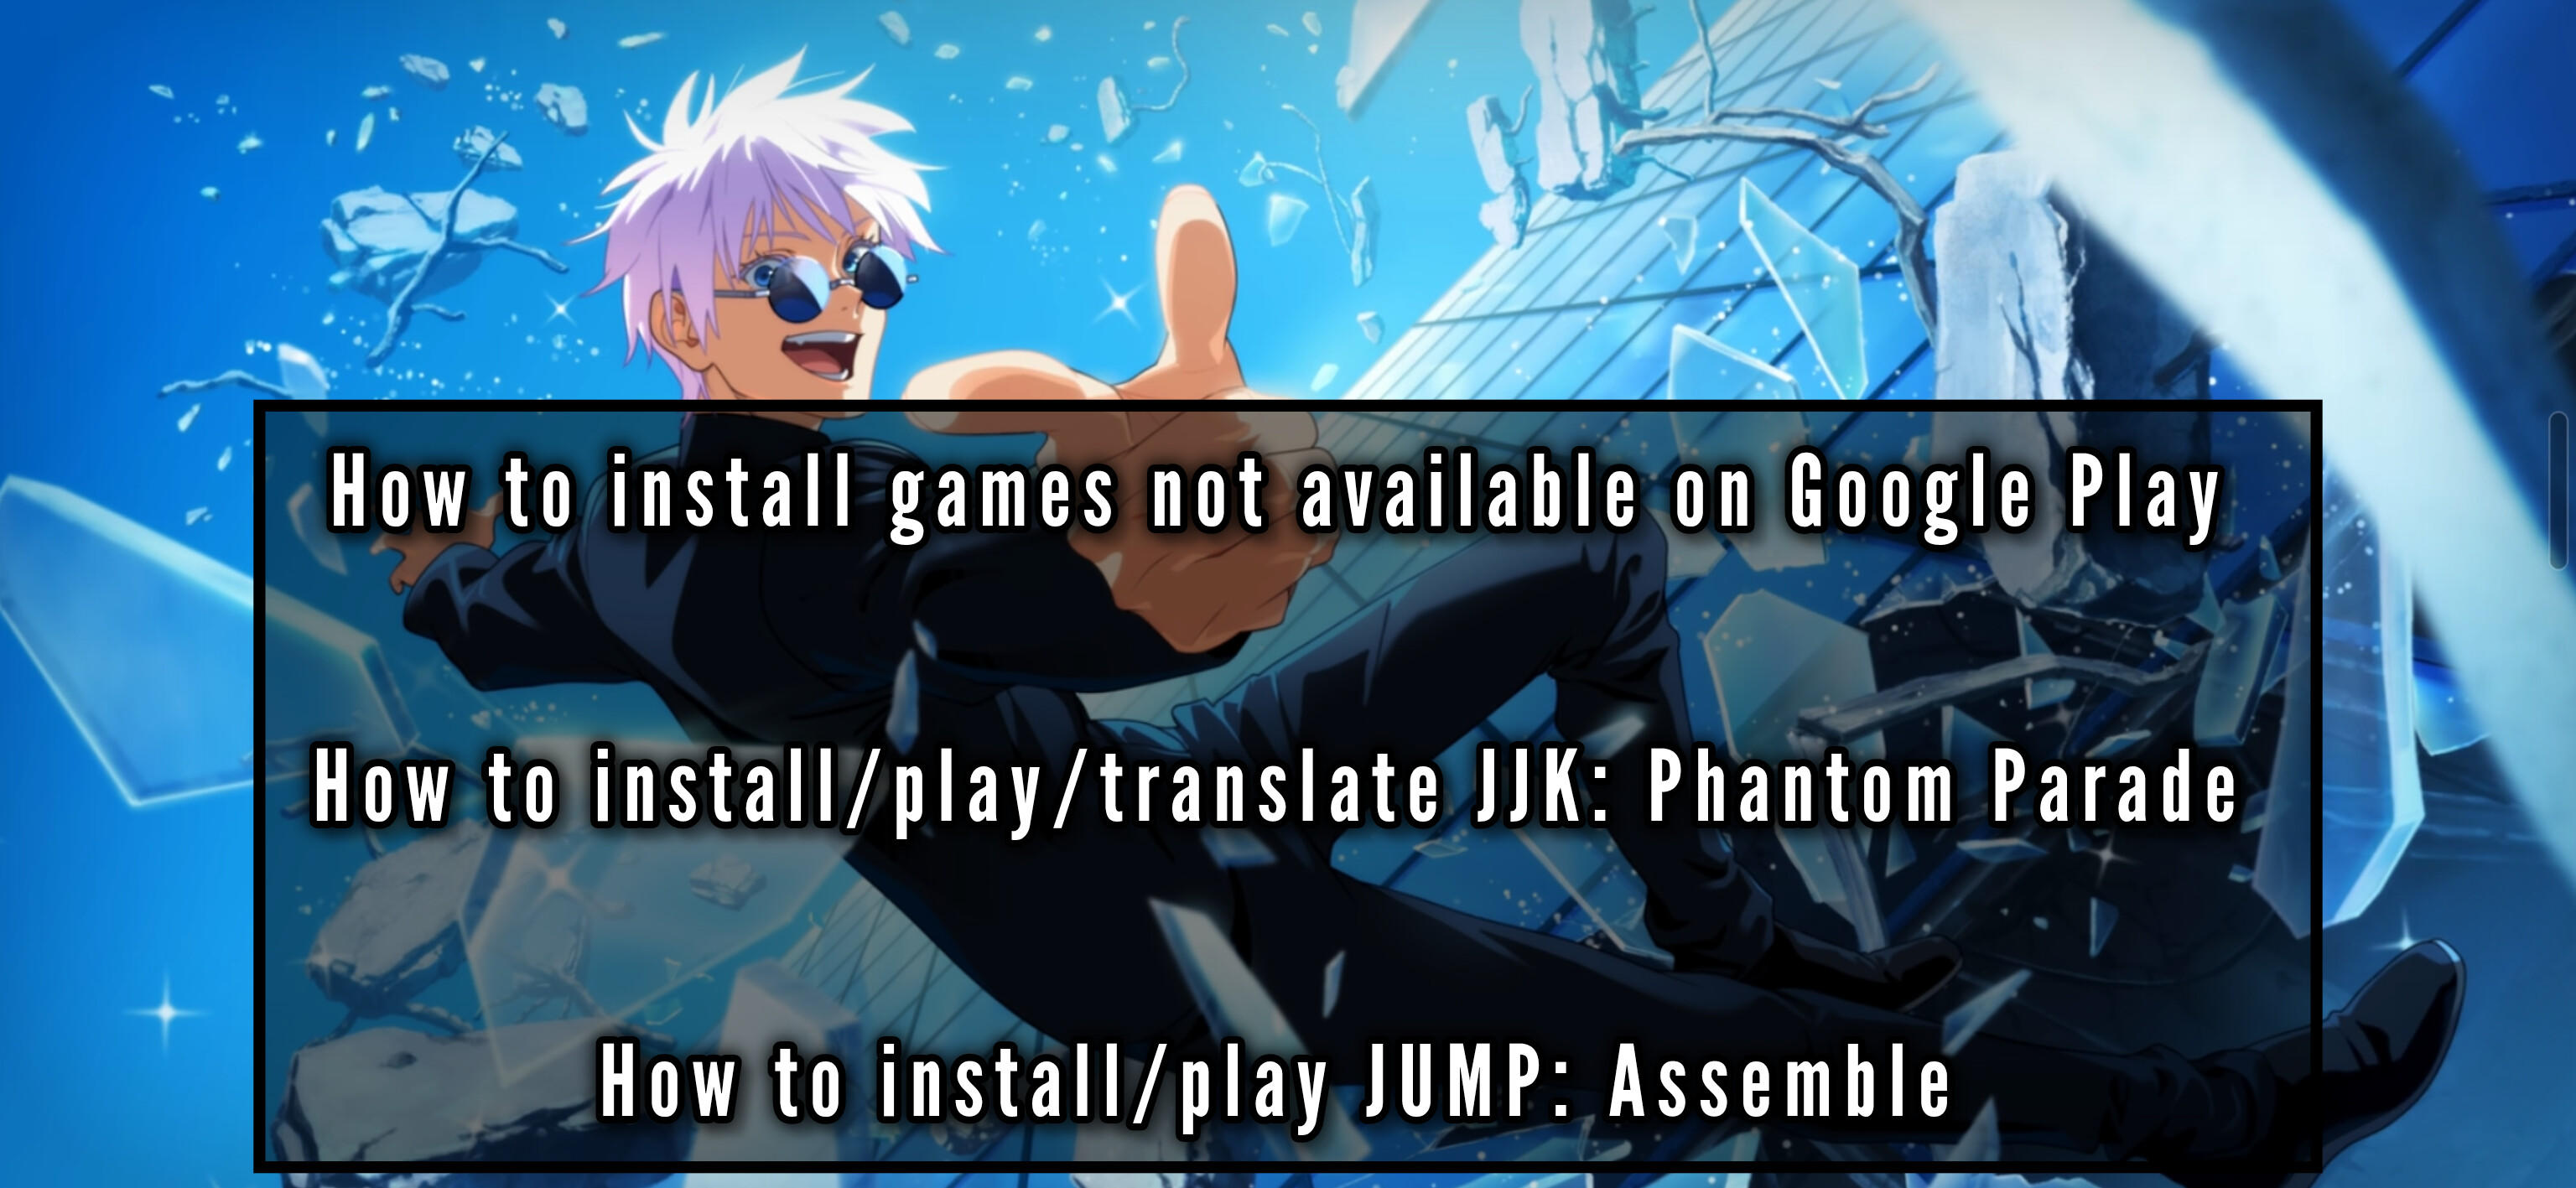 So I made a video tutorial to help people Install and translate this game